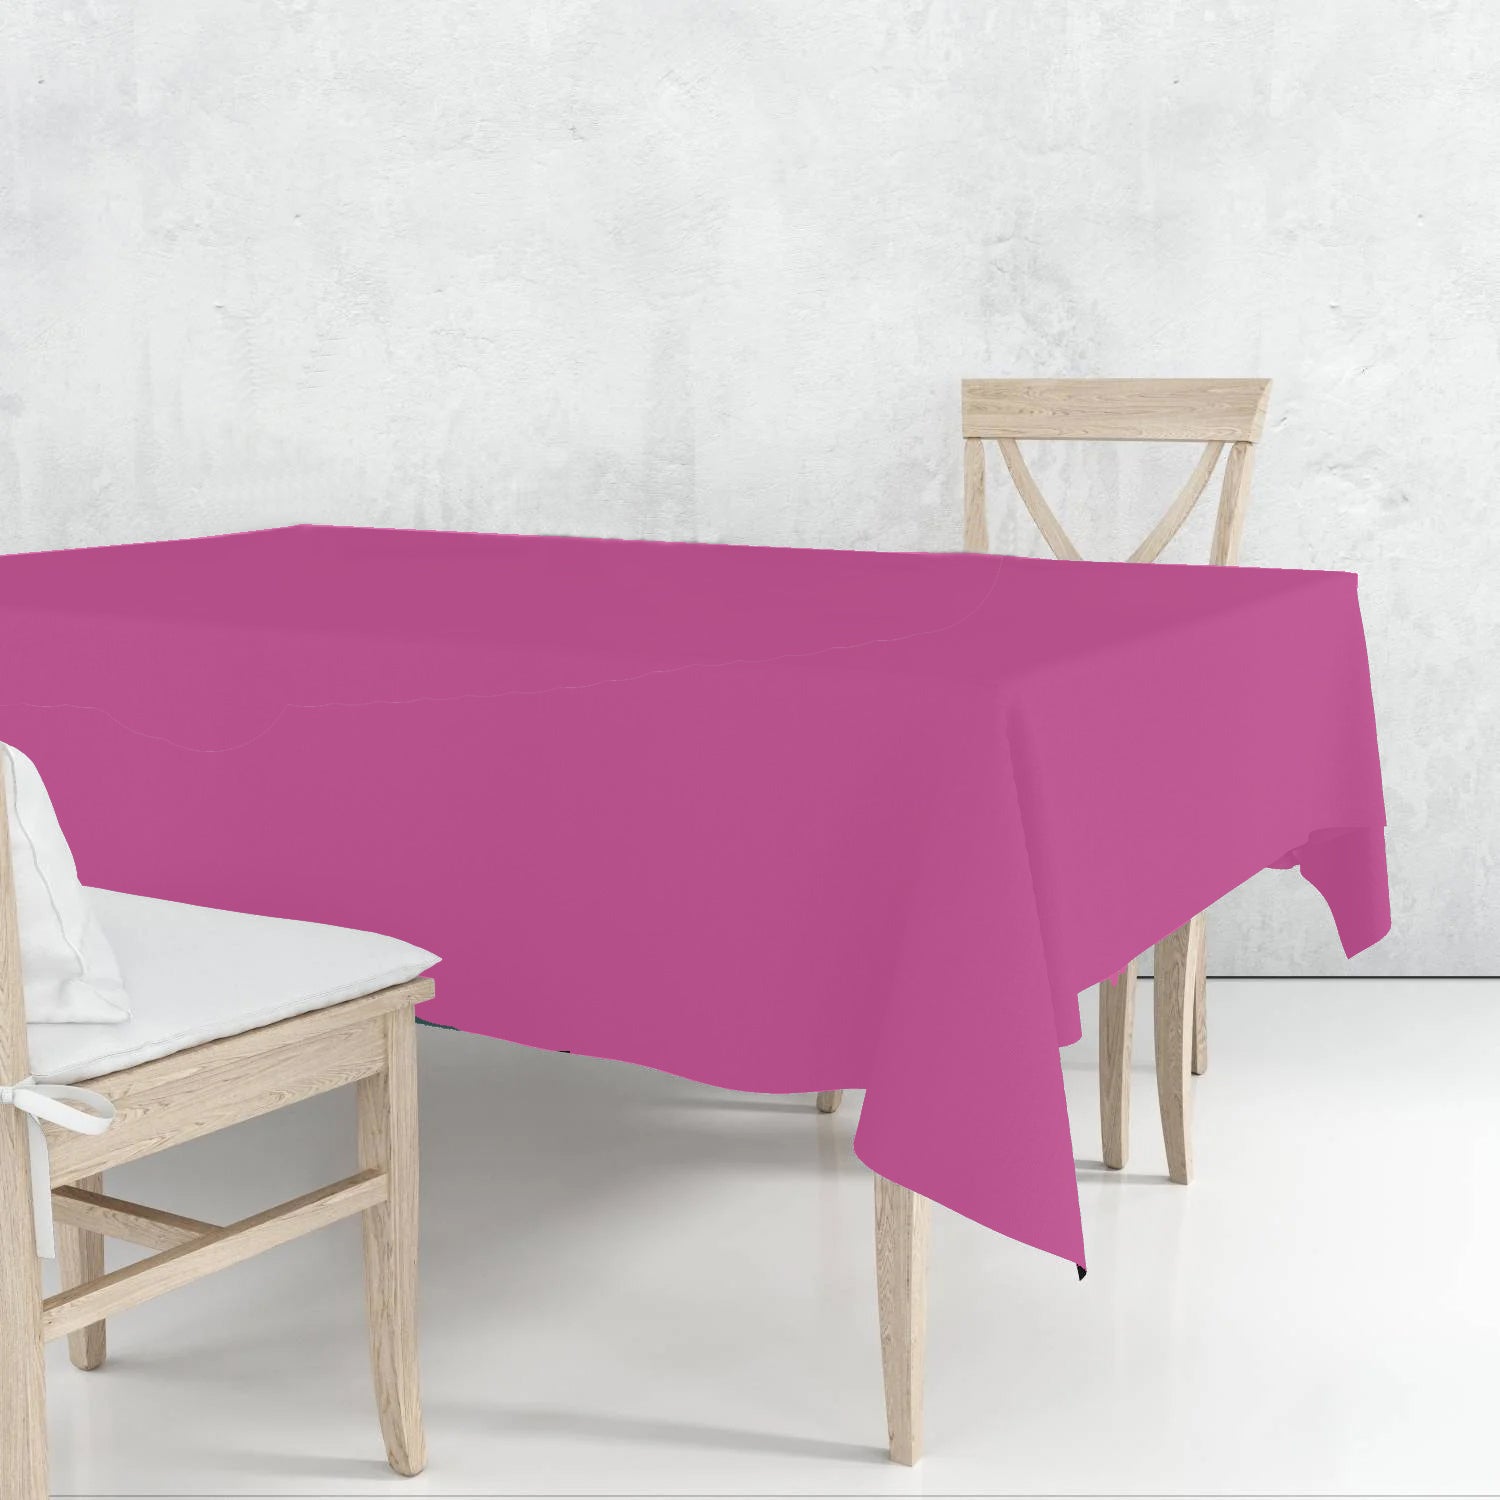 Disposable Plastic Premium Tablecloth Heavyweight Rectangle Hot Pink 54" x 108" Tablesettings Nicole Fantini Collection   